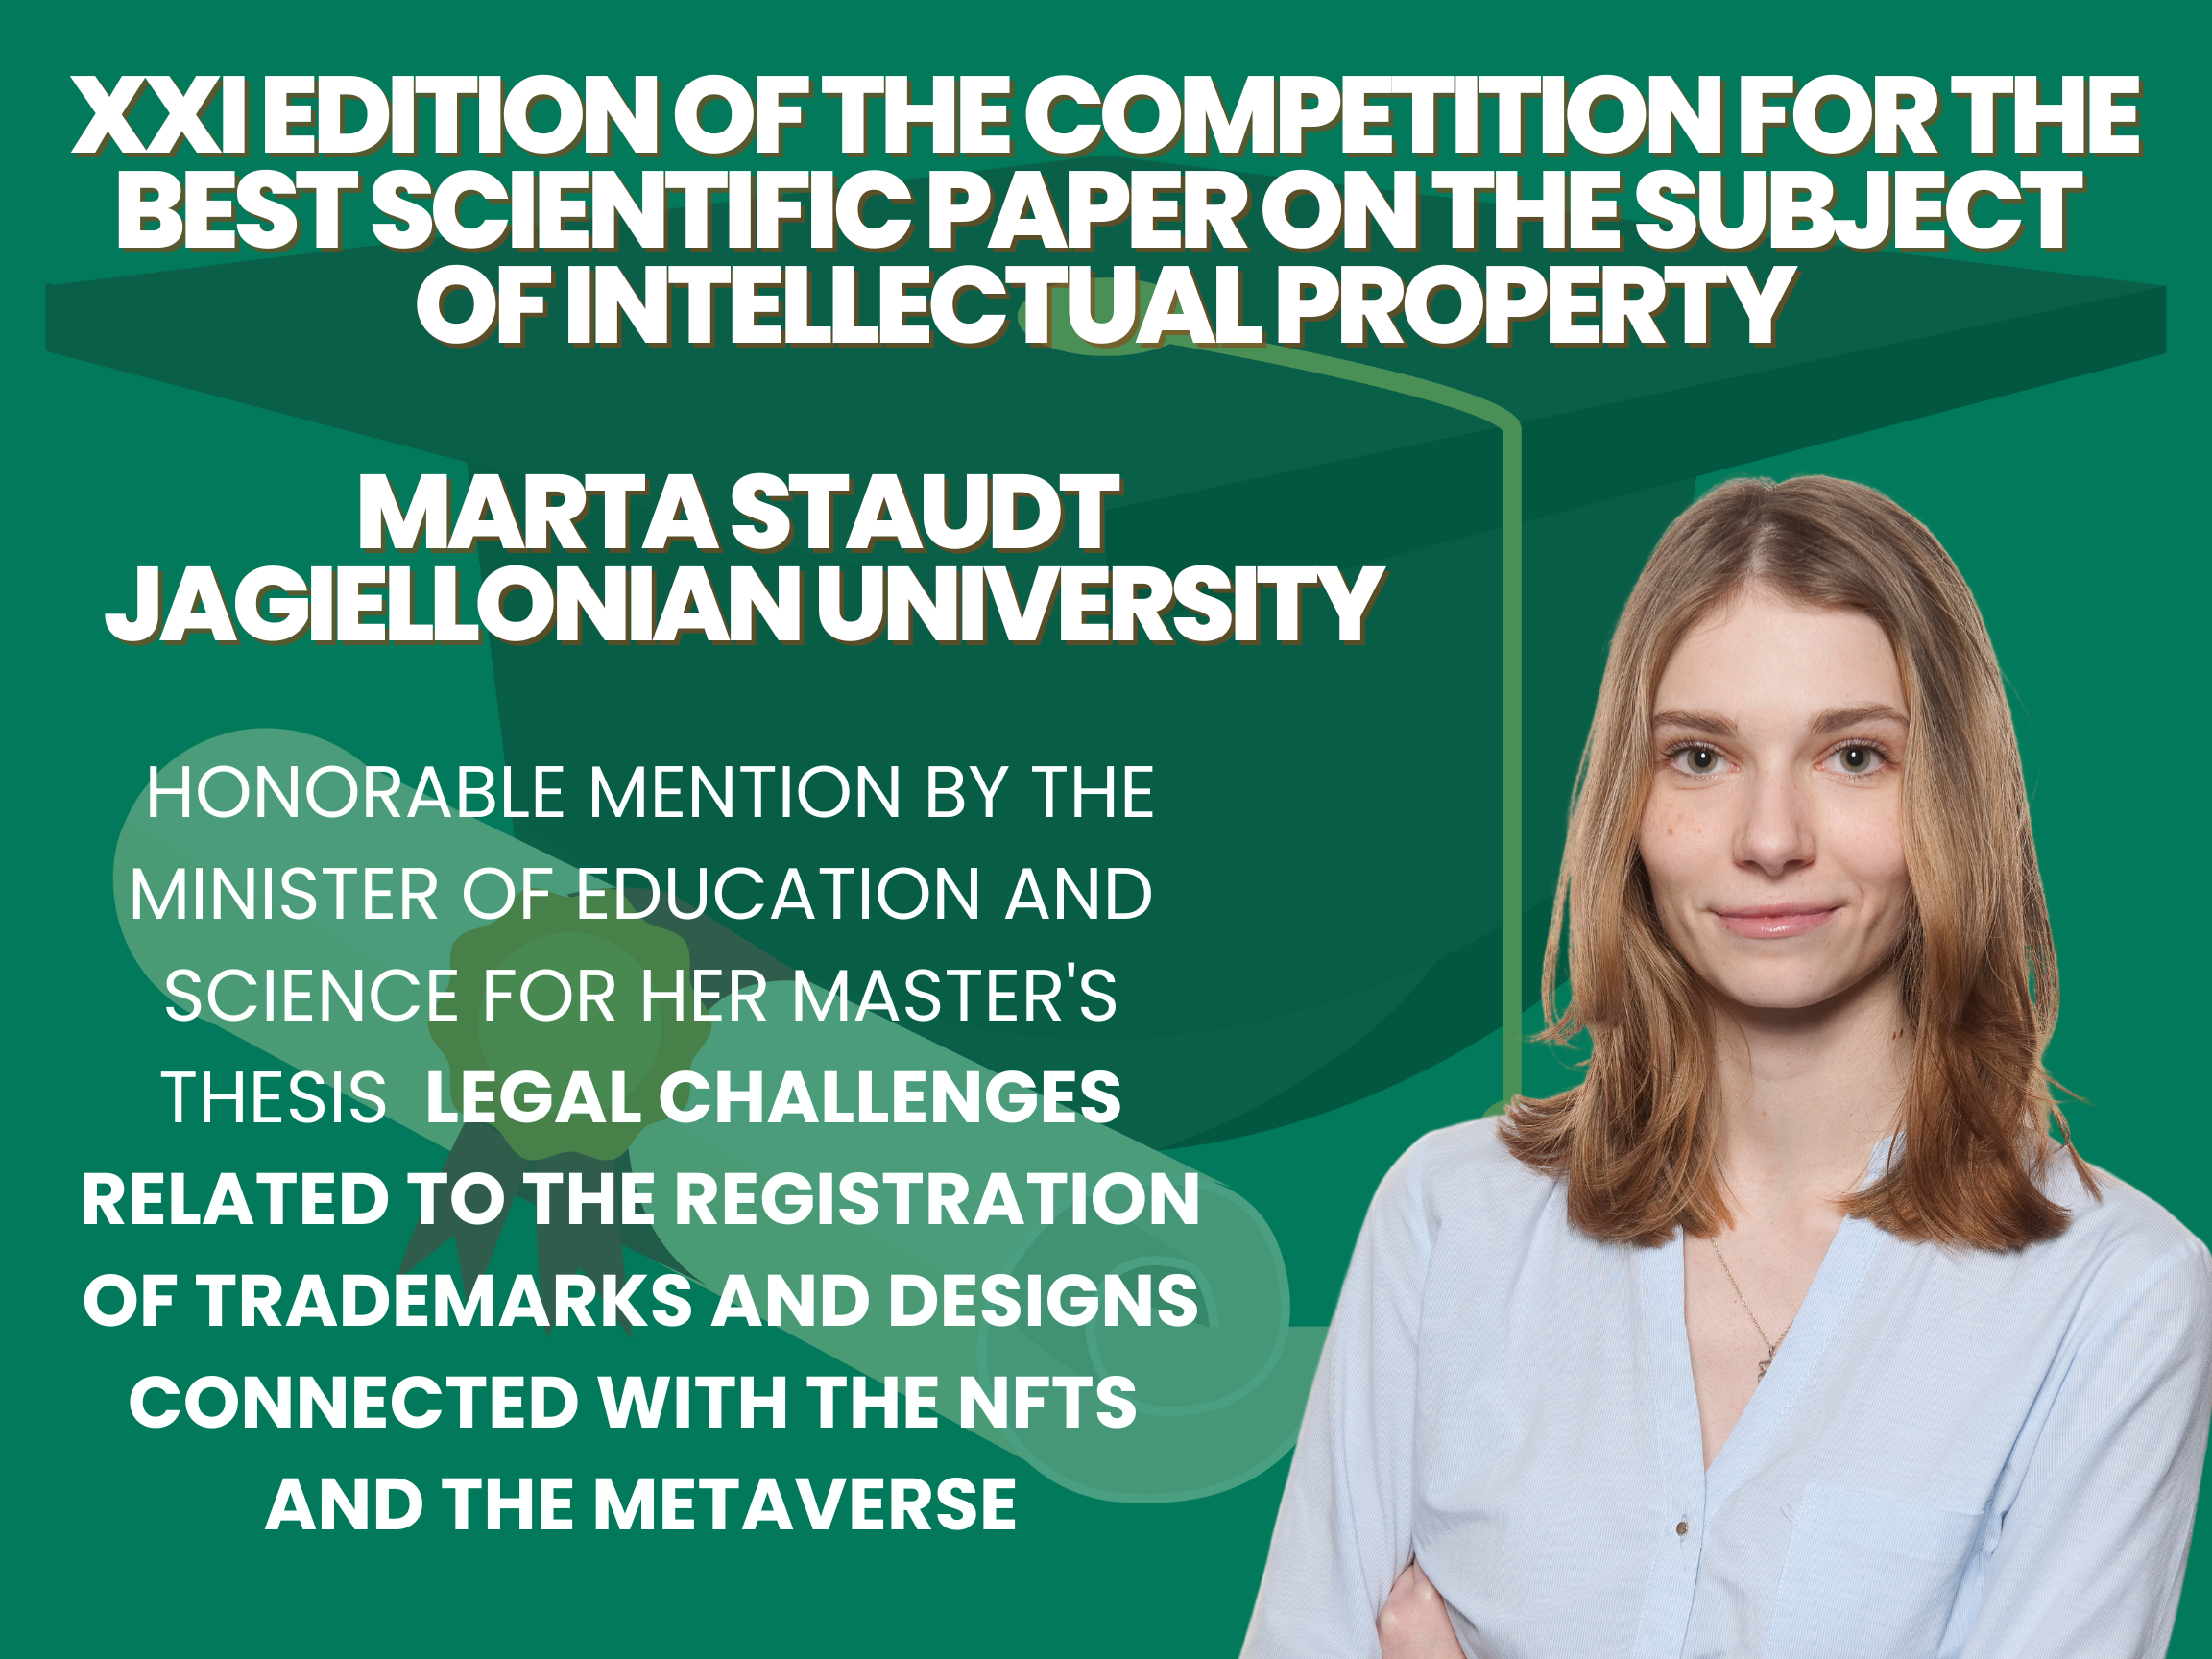 21st edition of the Competition for the best scientific paper on intellectual property